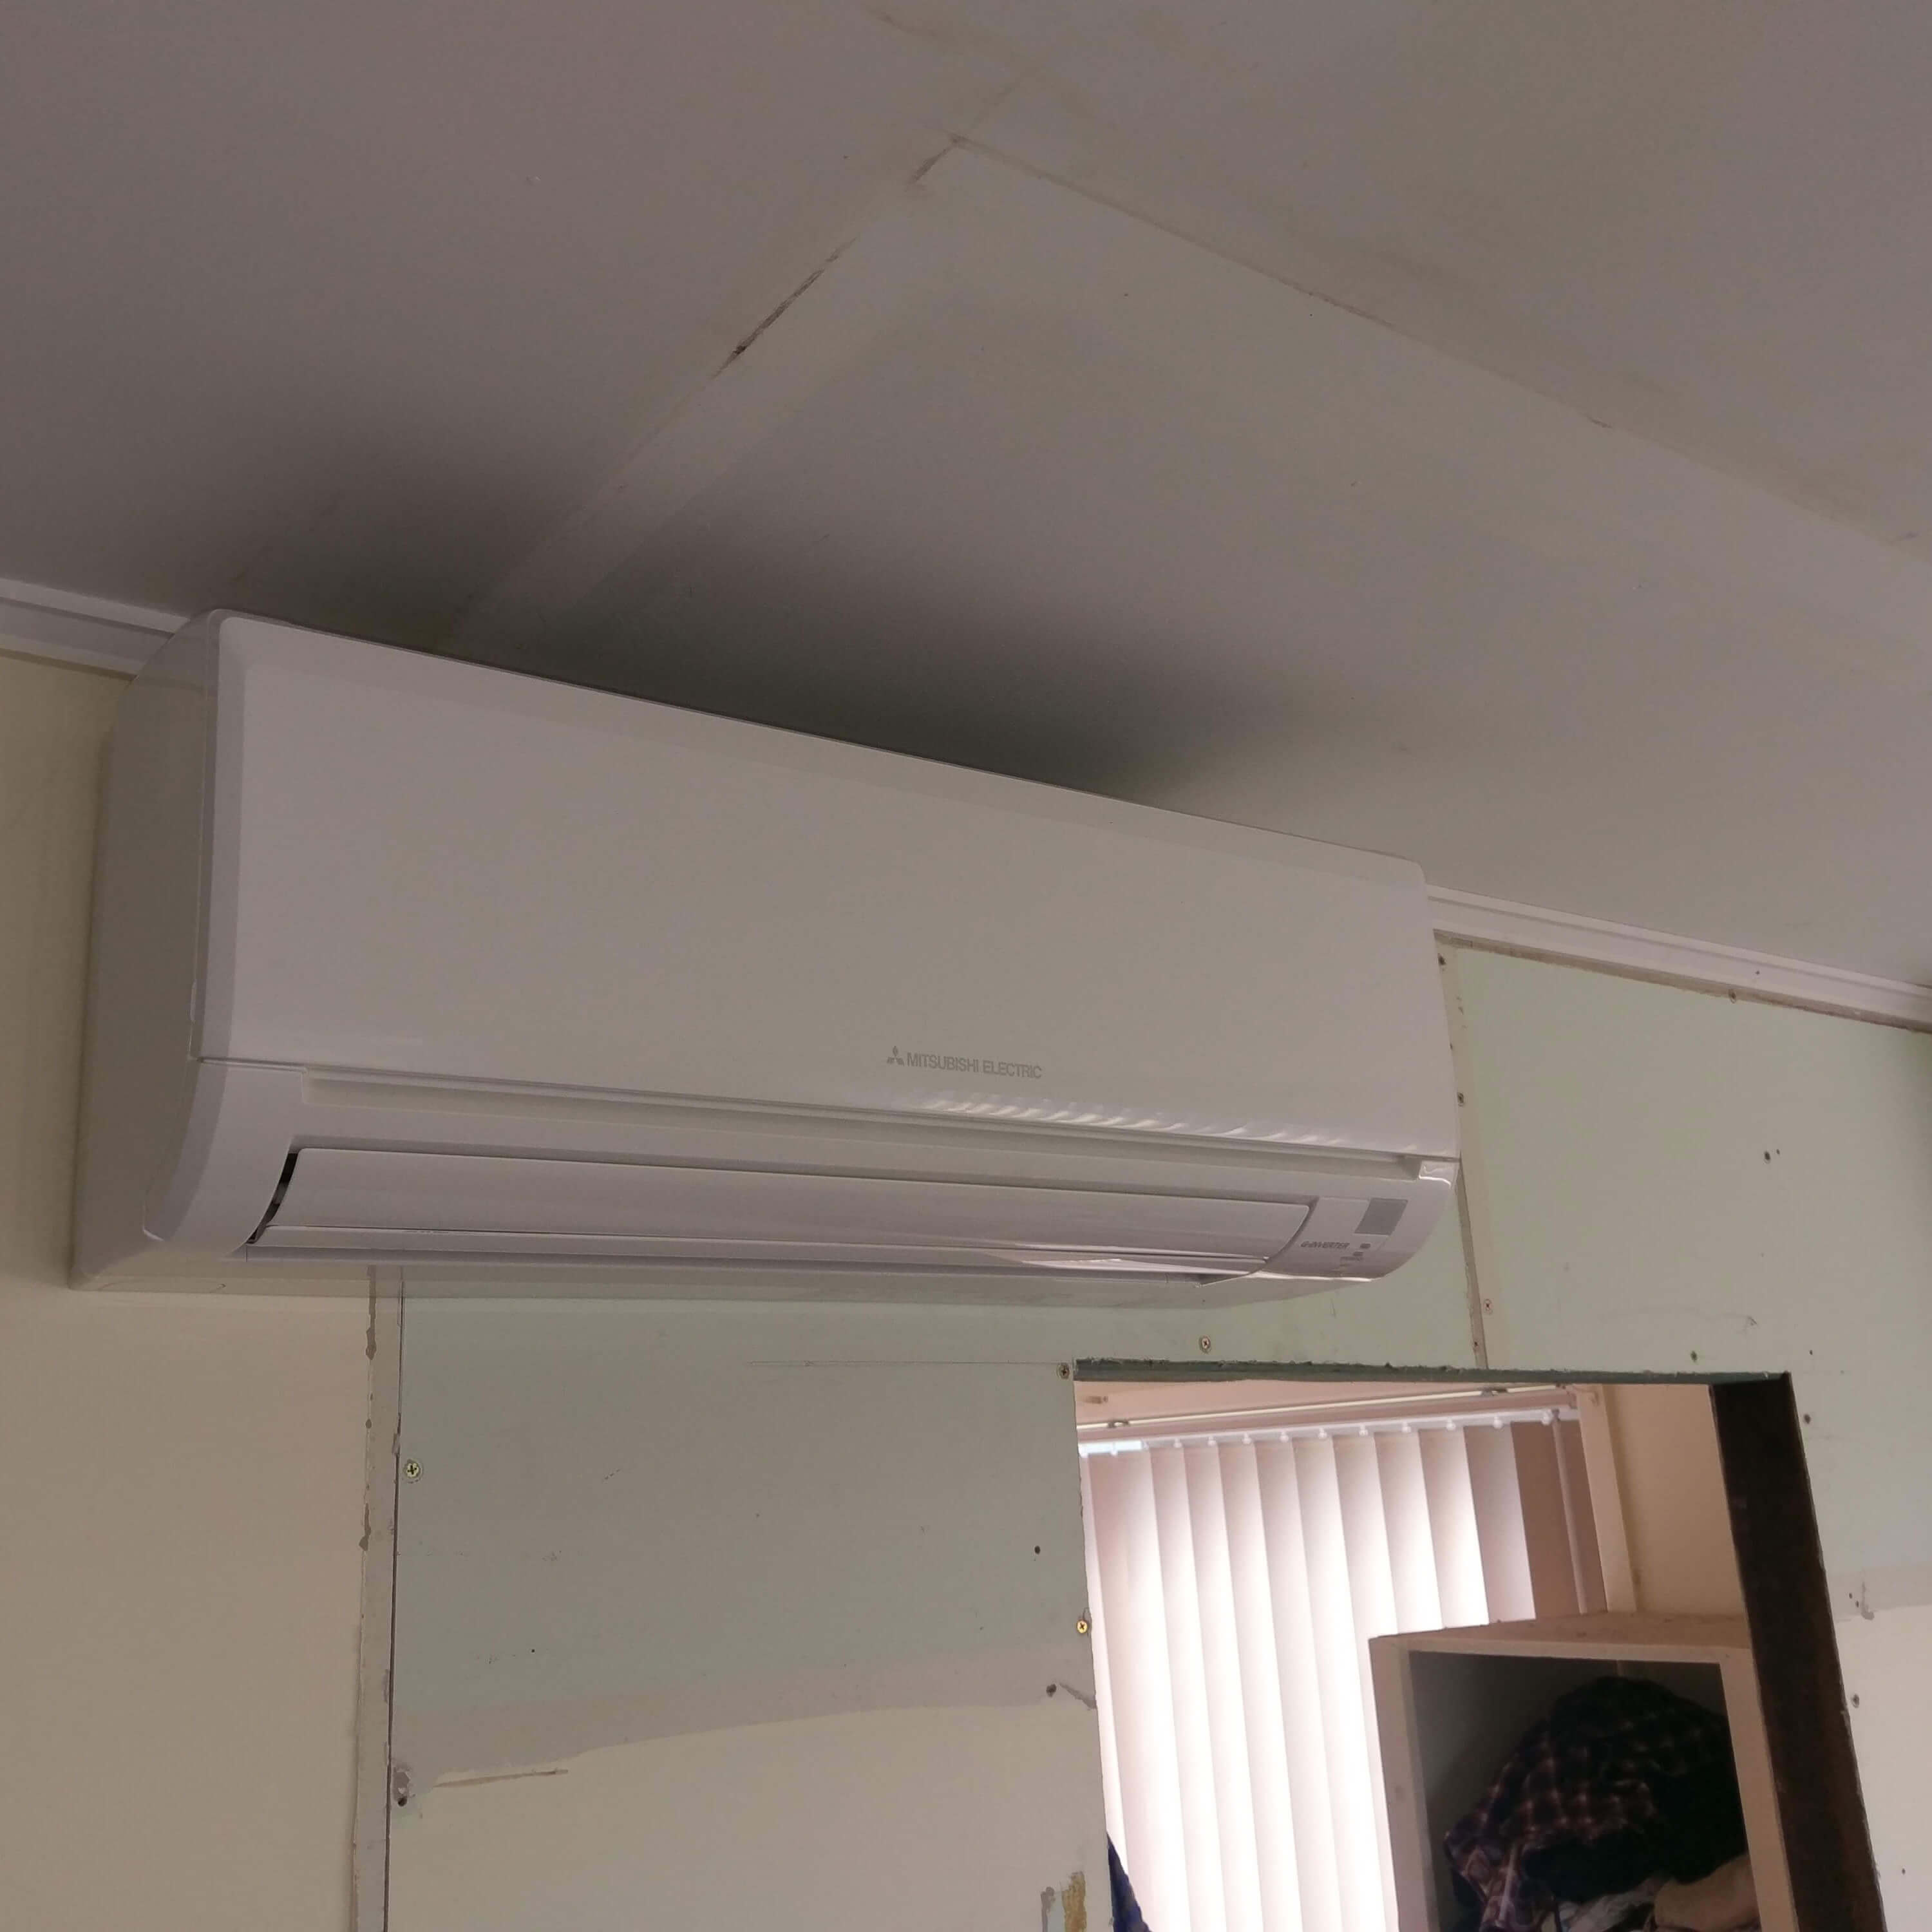 All districts air conditioning hervey Bay installation gallery image 7